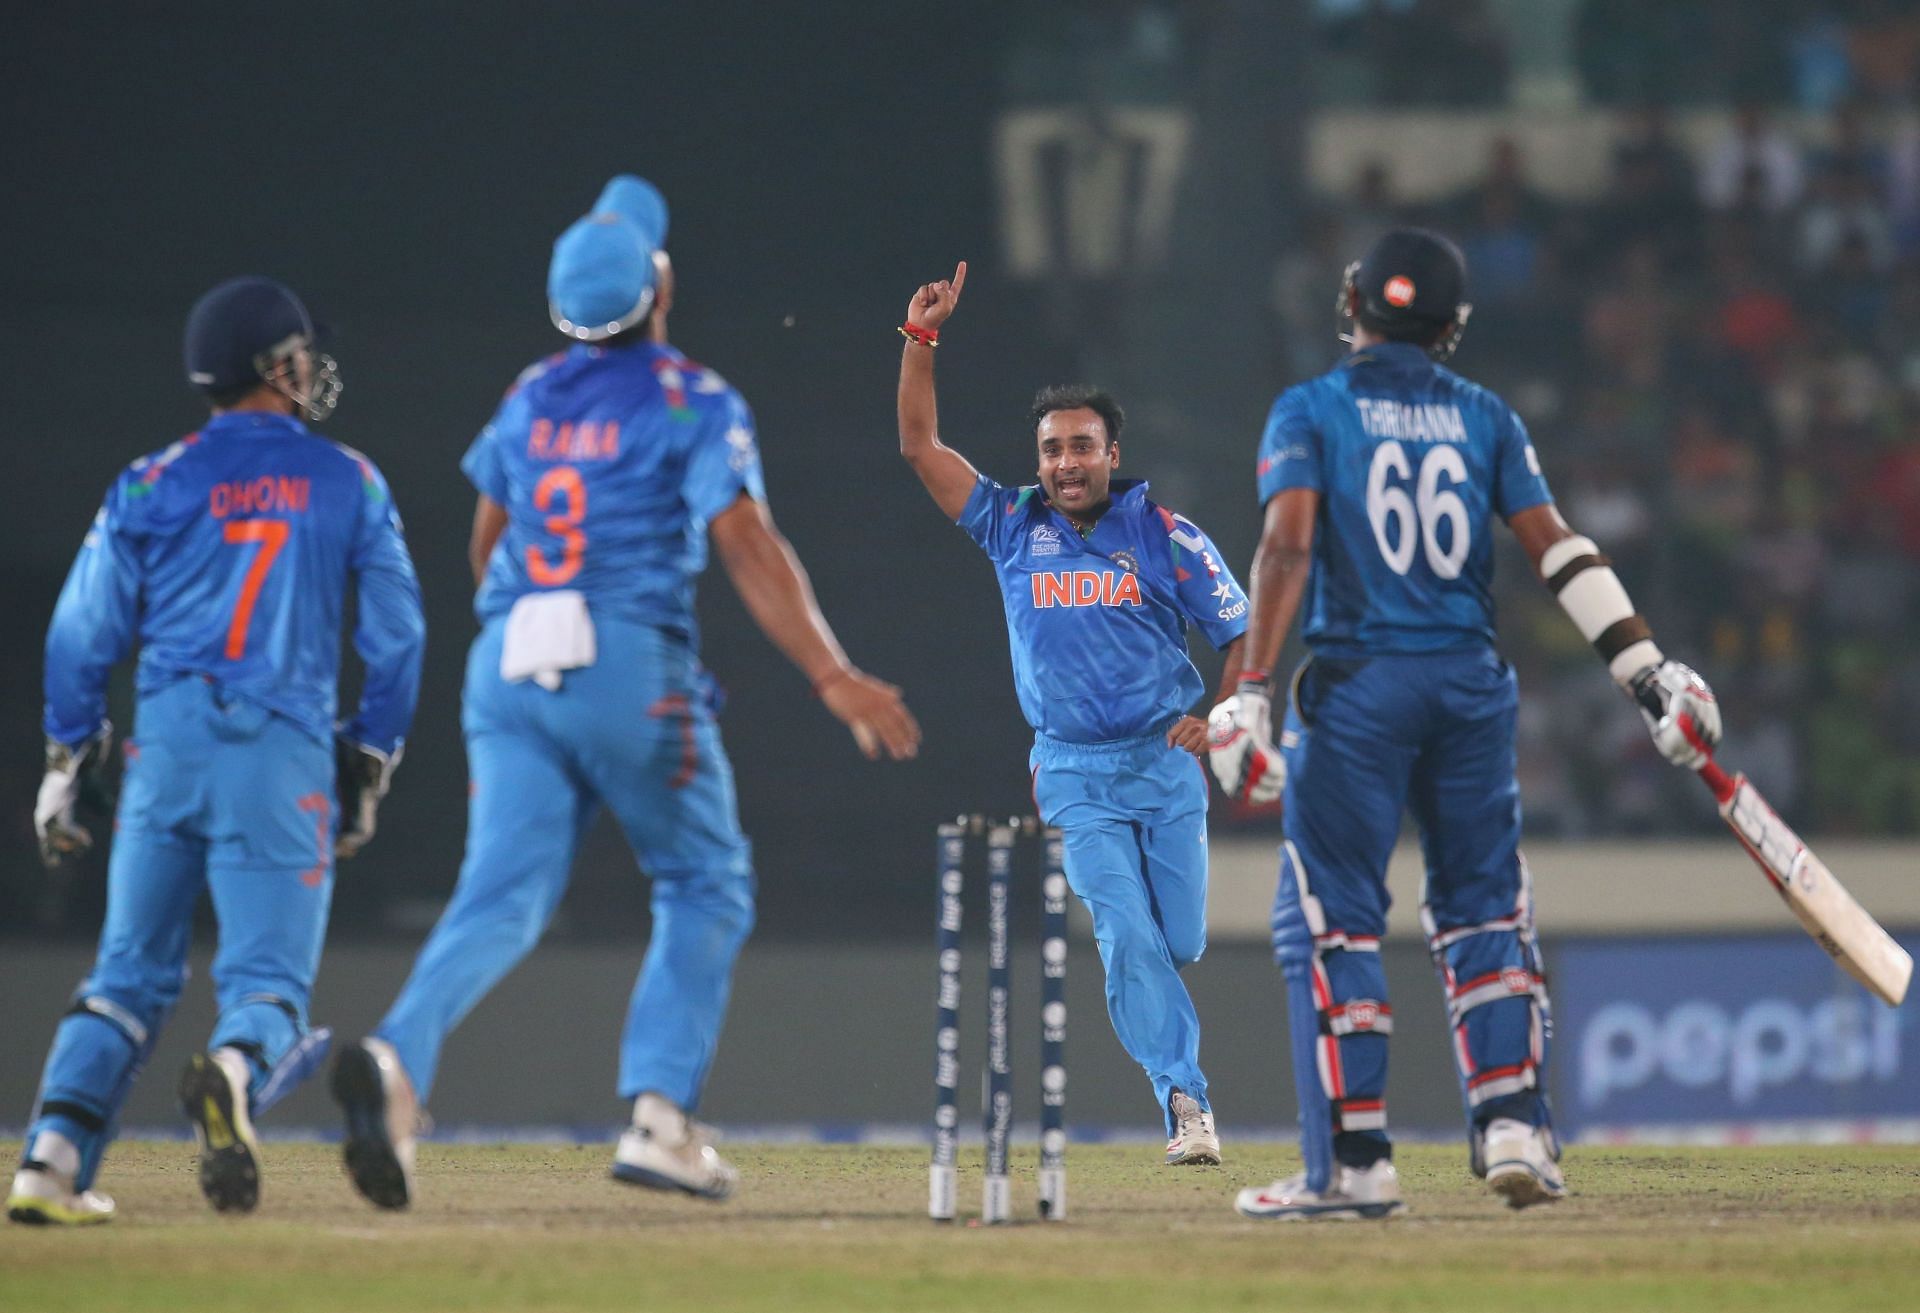 Amit Mishra in action during 2014 T20 World Cup. (Credits: Getty)